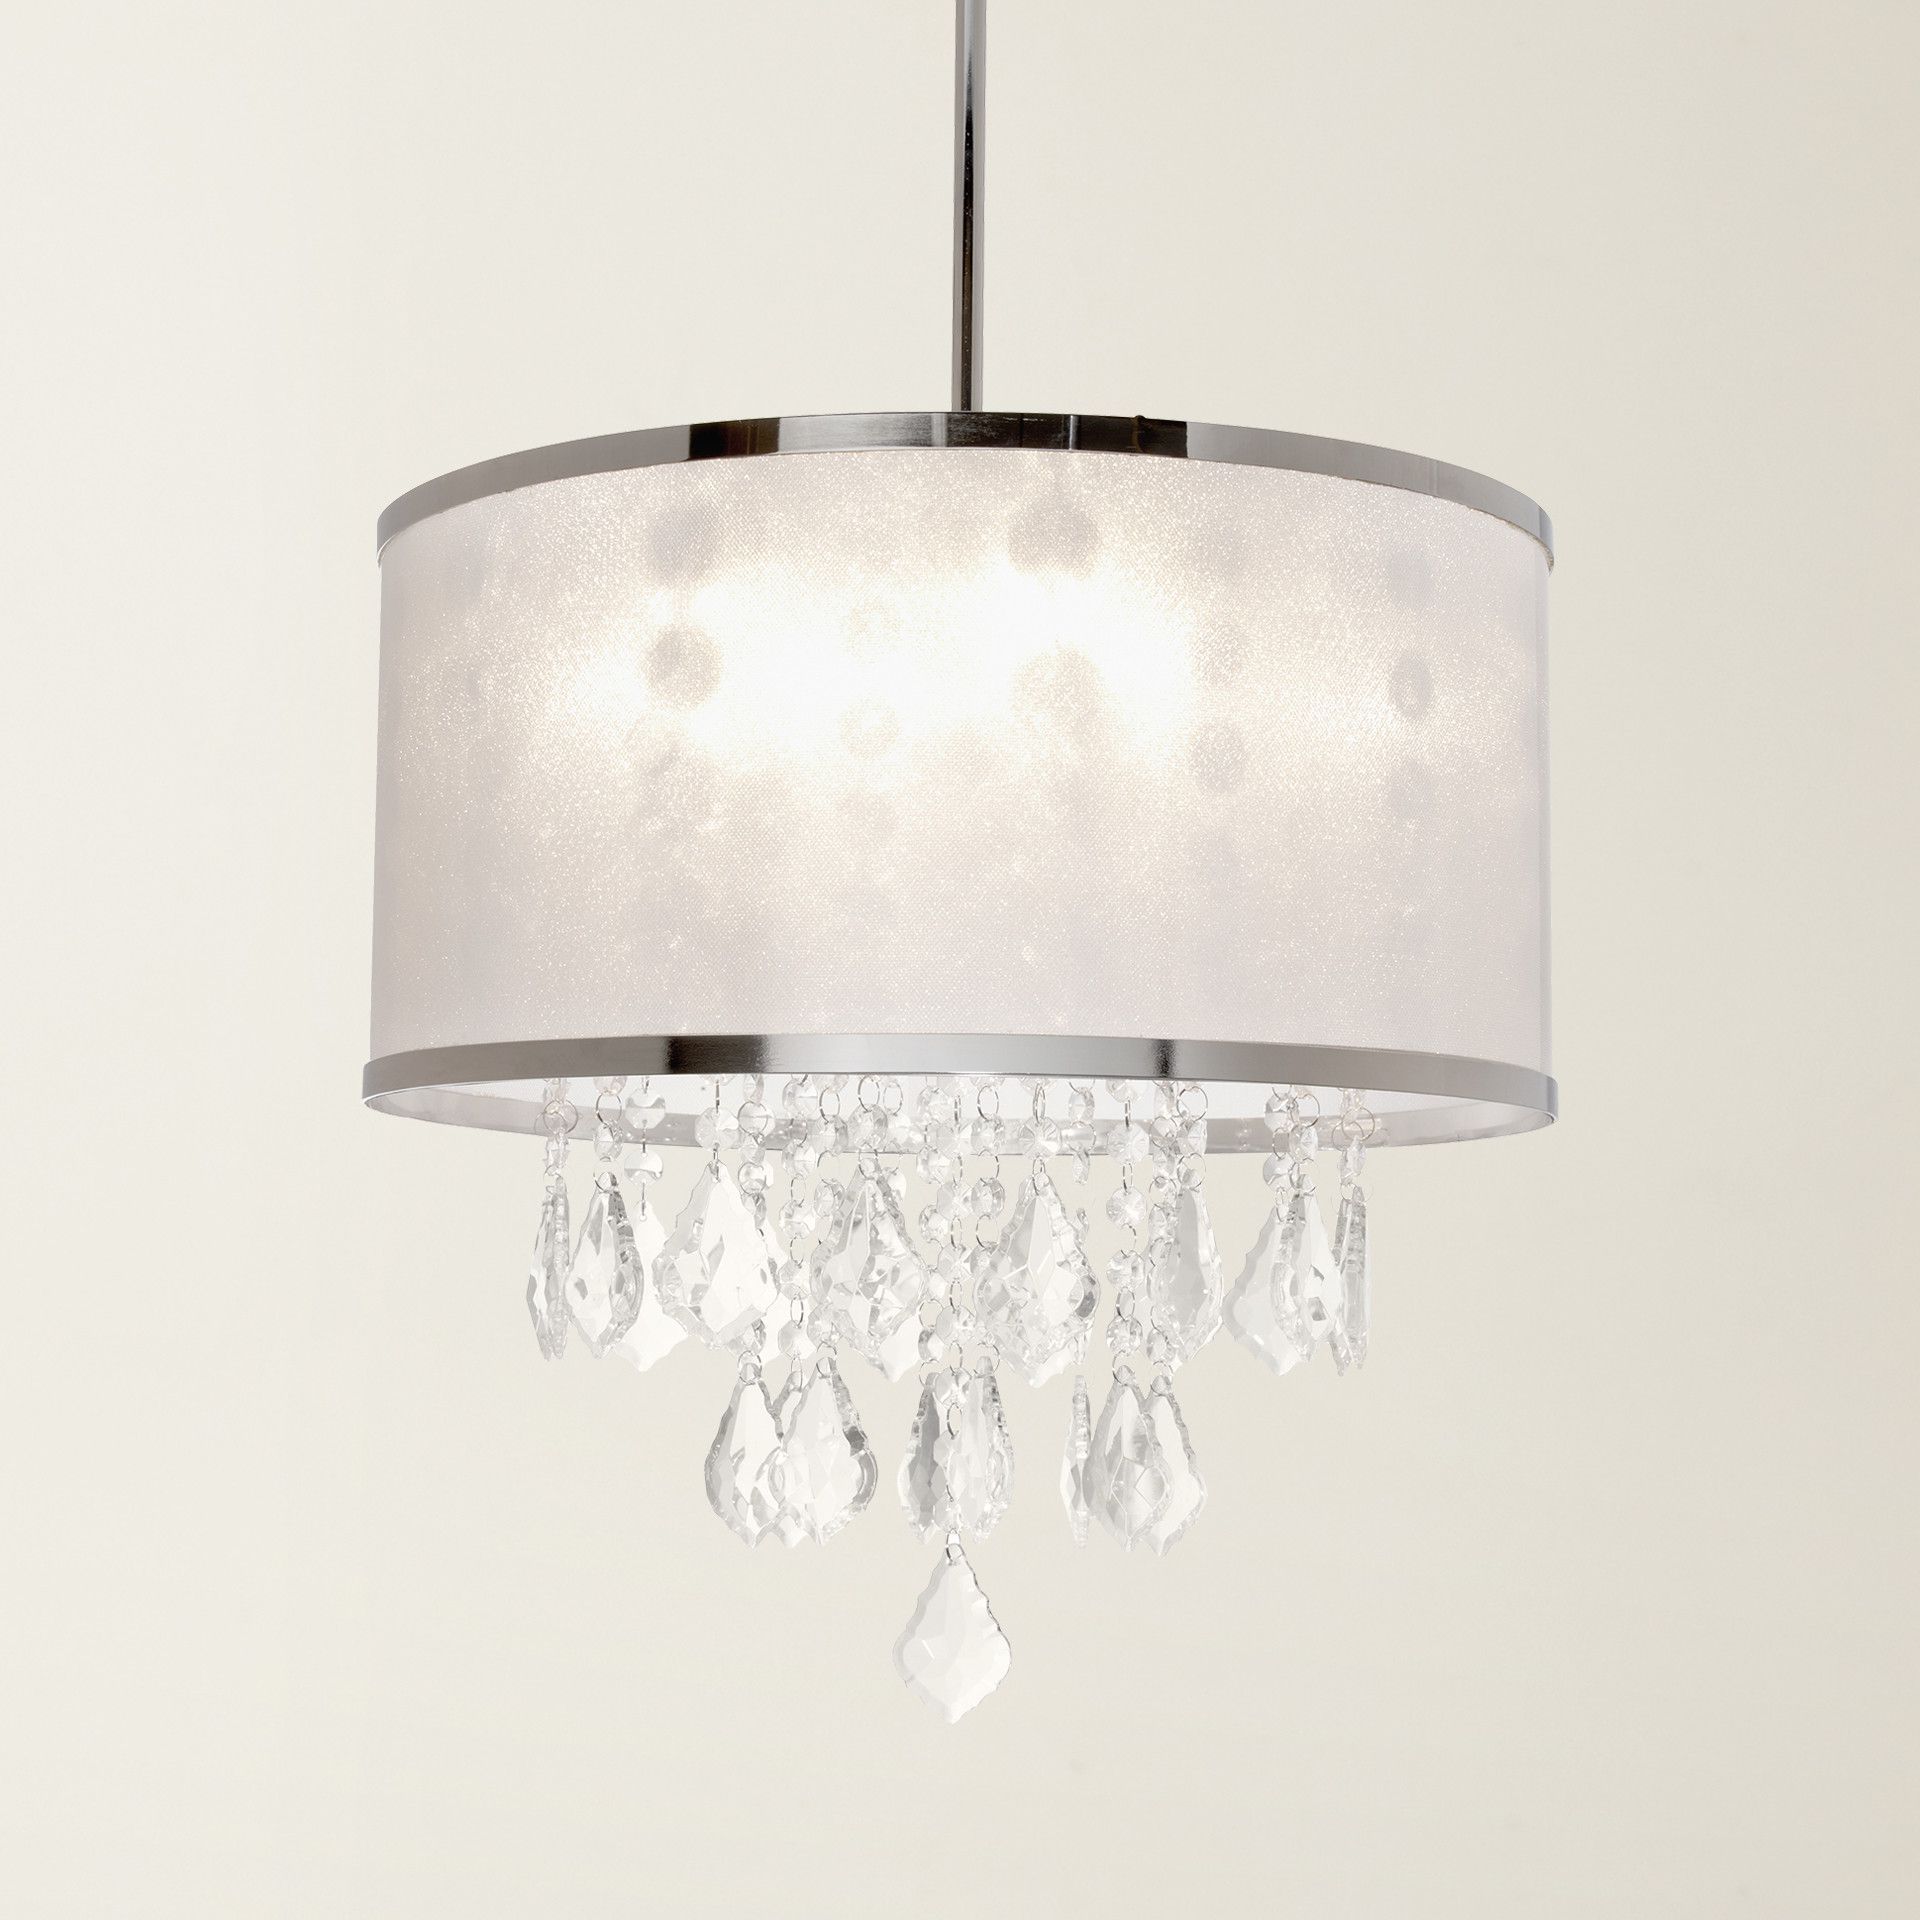 Famous House Of Hampton® Leibowitz 4 Light Drum Chandelier Throughout Lindsey 4 Light Drum Chandeliers (Gallery 2 of 20)